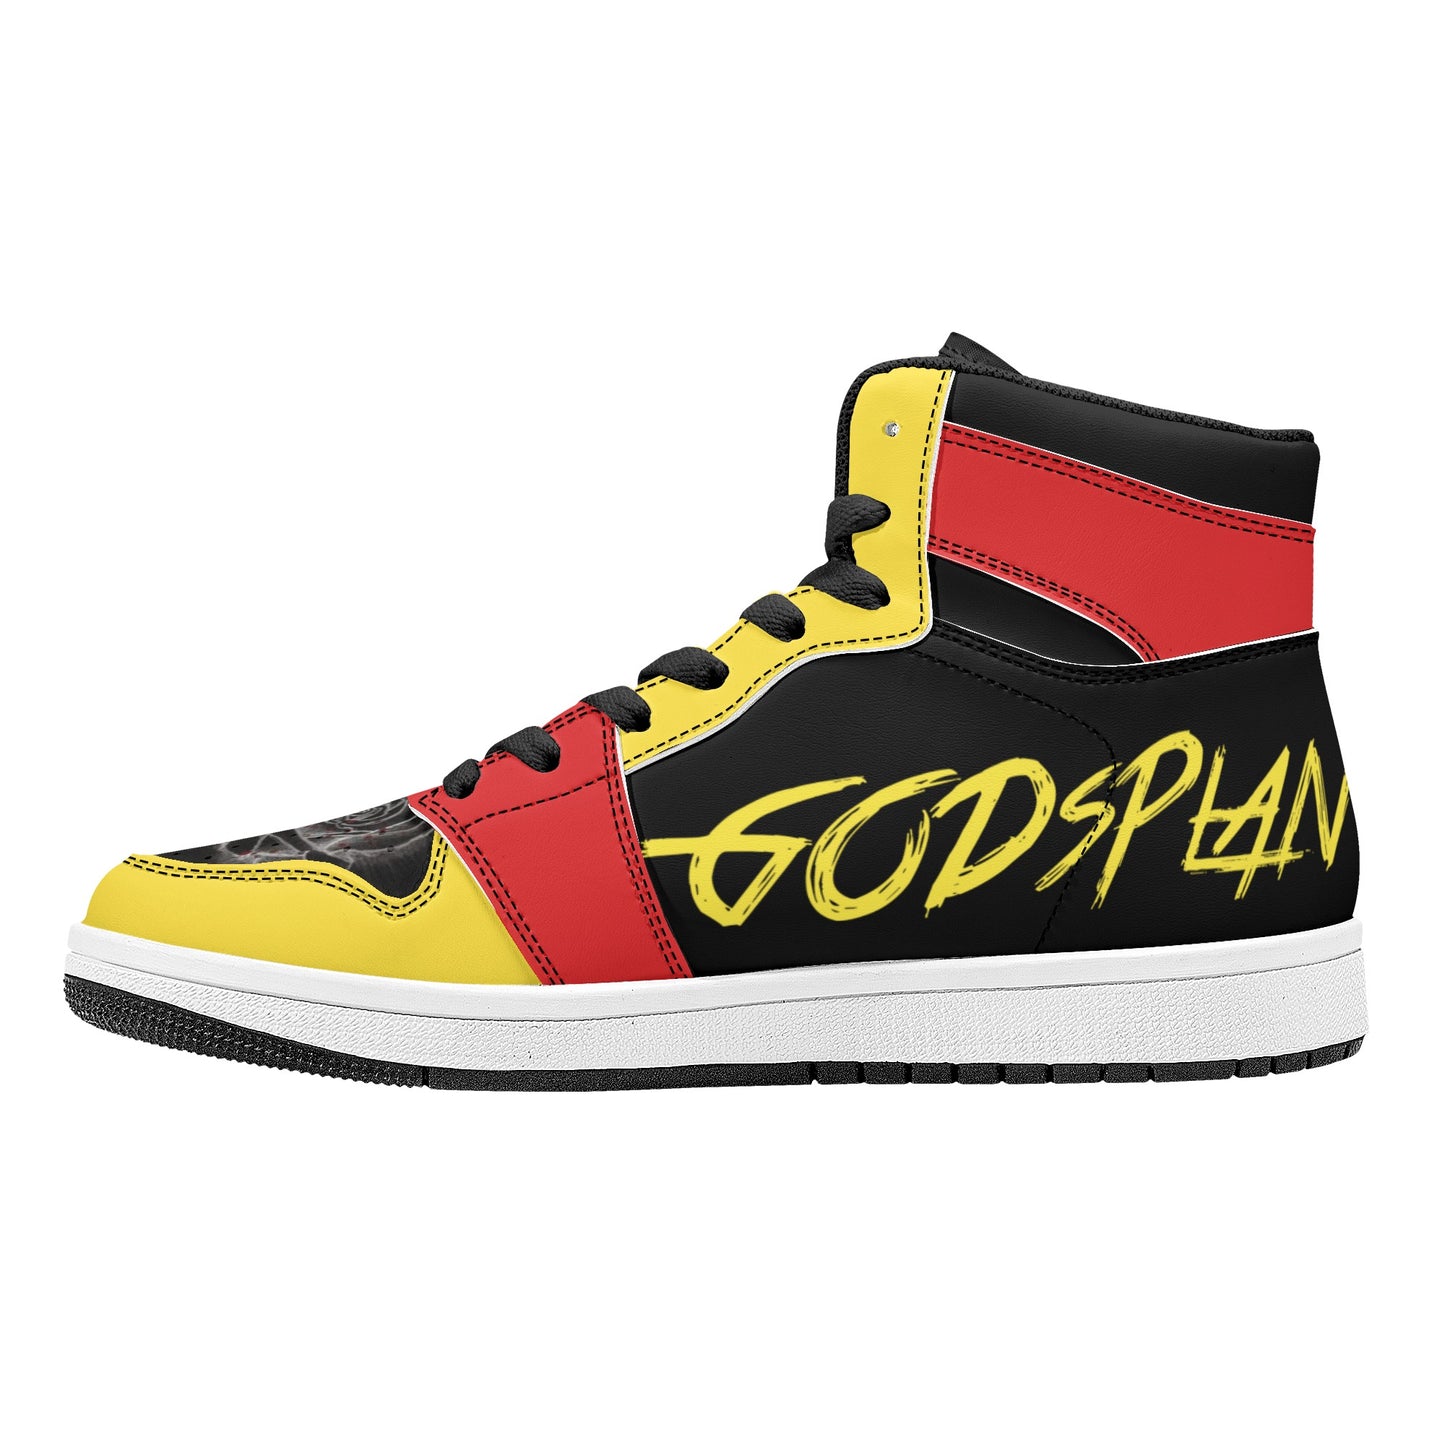 Sean Breed Gods Plan Love Mens High Top Leather Sneakers